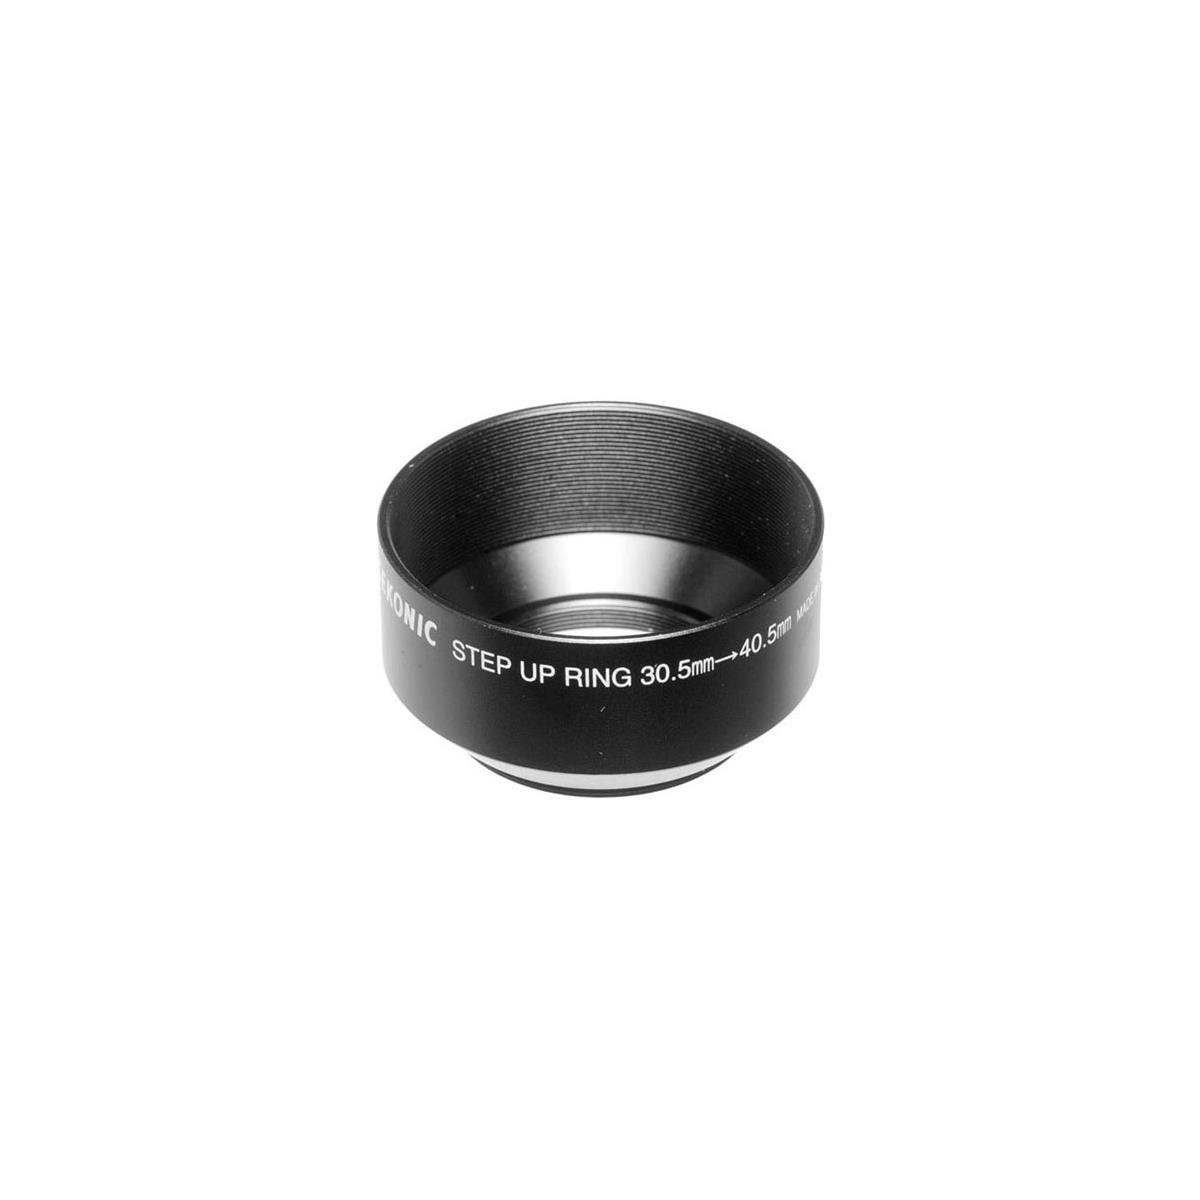 Image of Sekonic 401624 Zoom Lens Hood for L-608 and L-558